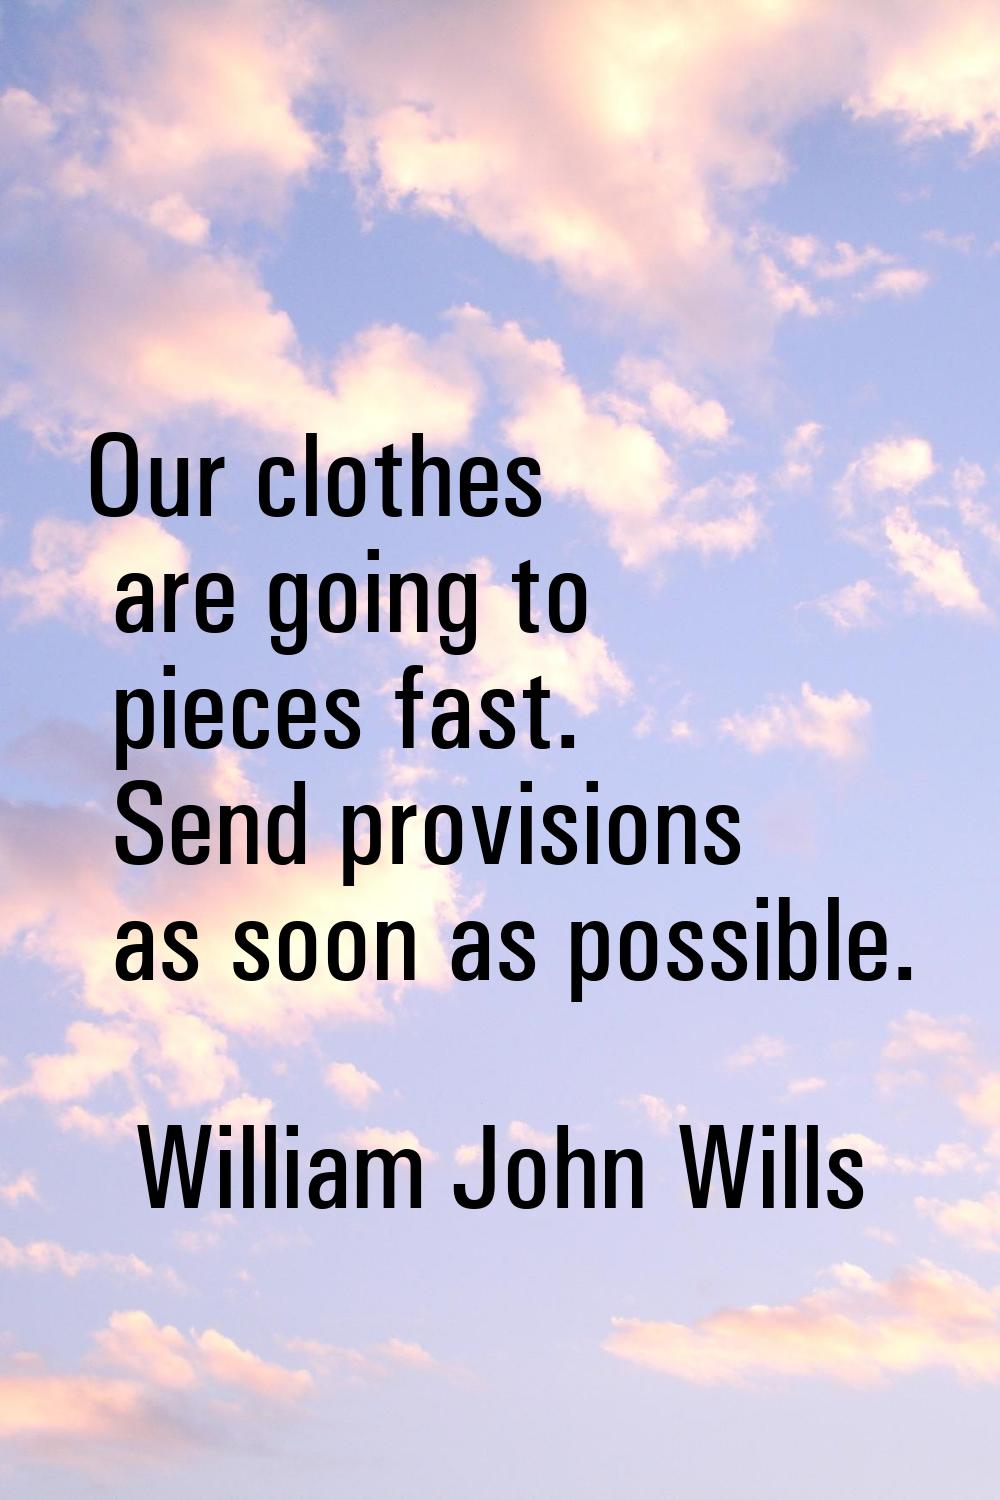 Our clothes are going to pieces fast. Send provisions as soon as possible.